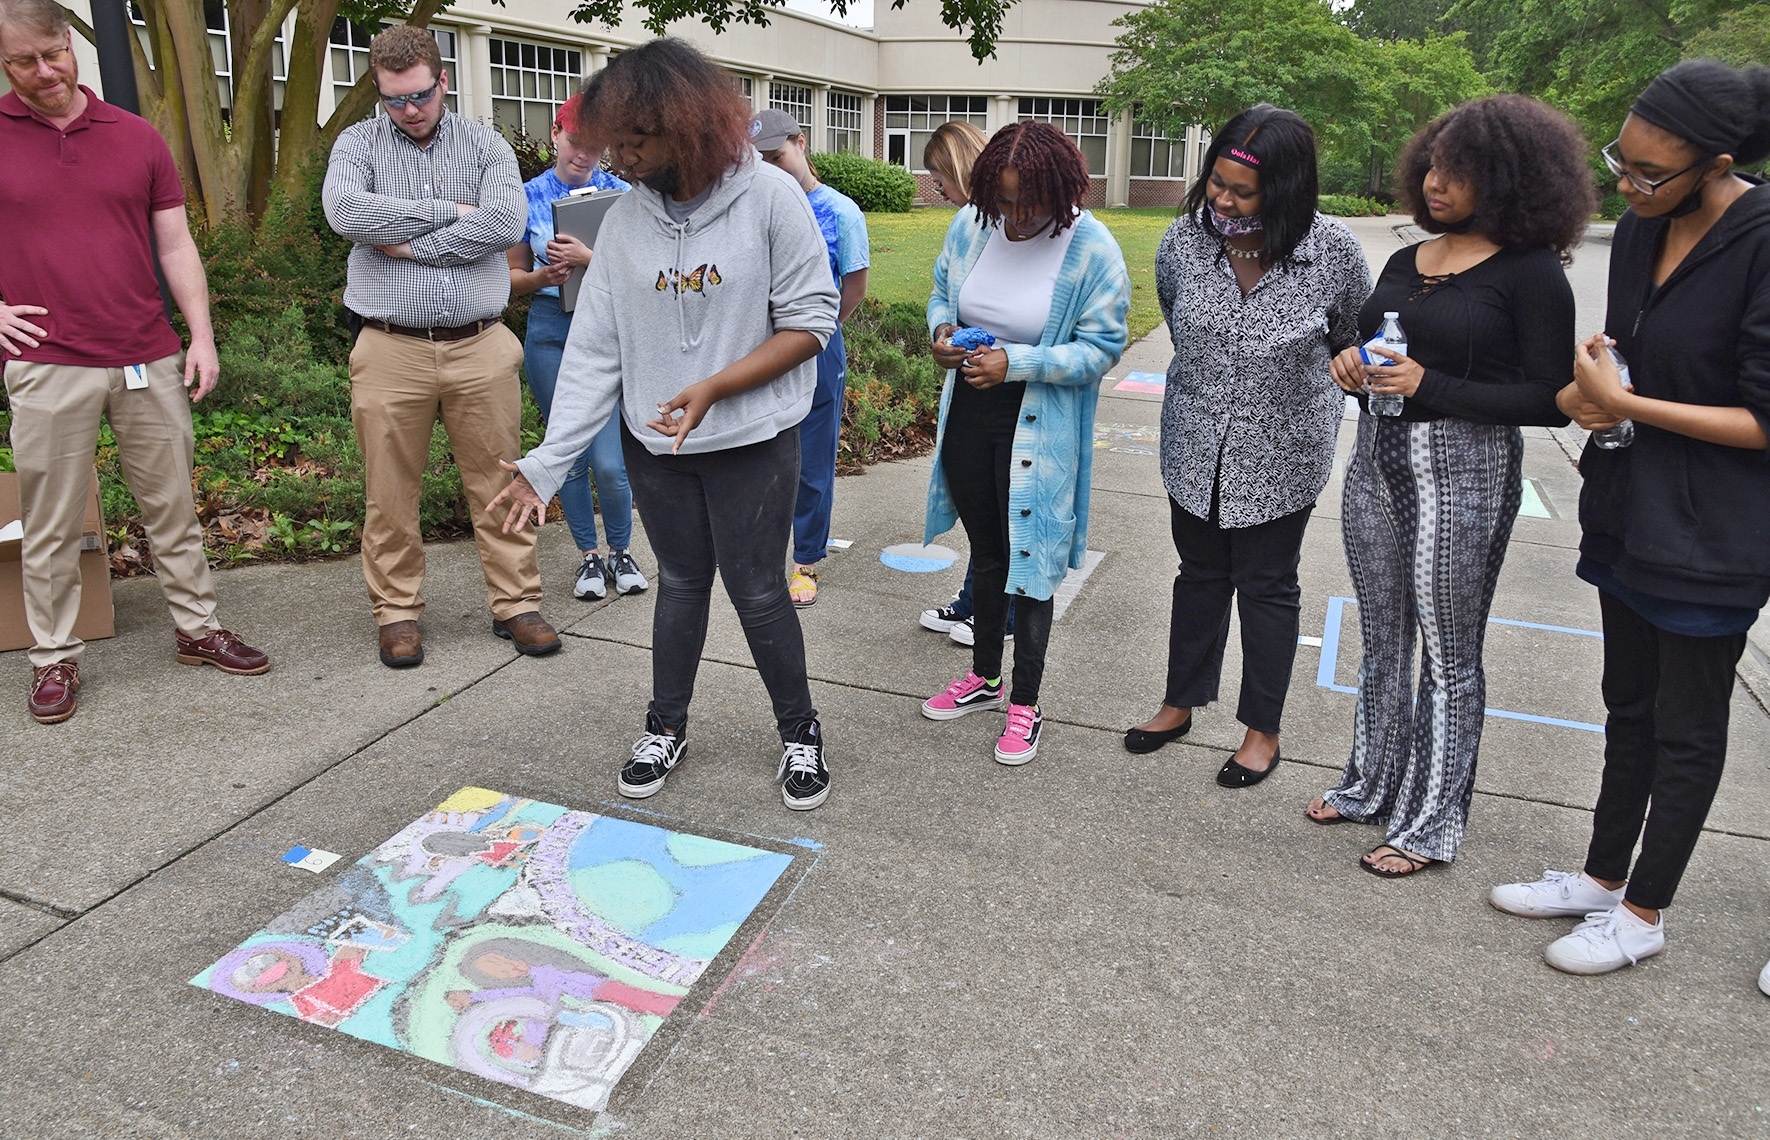 We offer a scholarship program based on a water-themed chalk art contest. Here, a student explains their artwork to the judge panel.